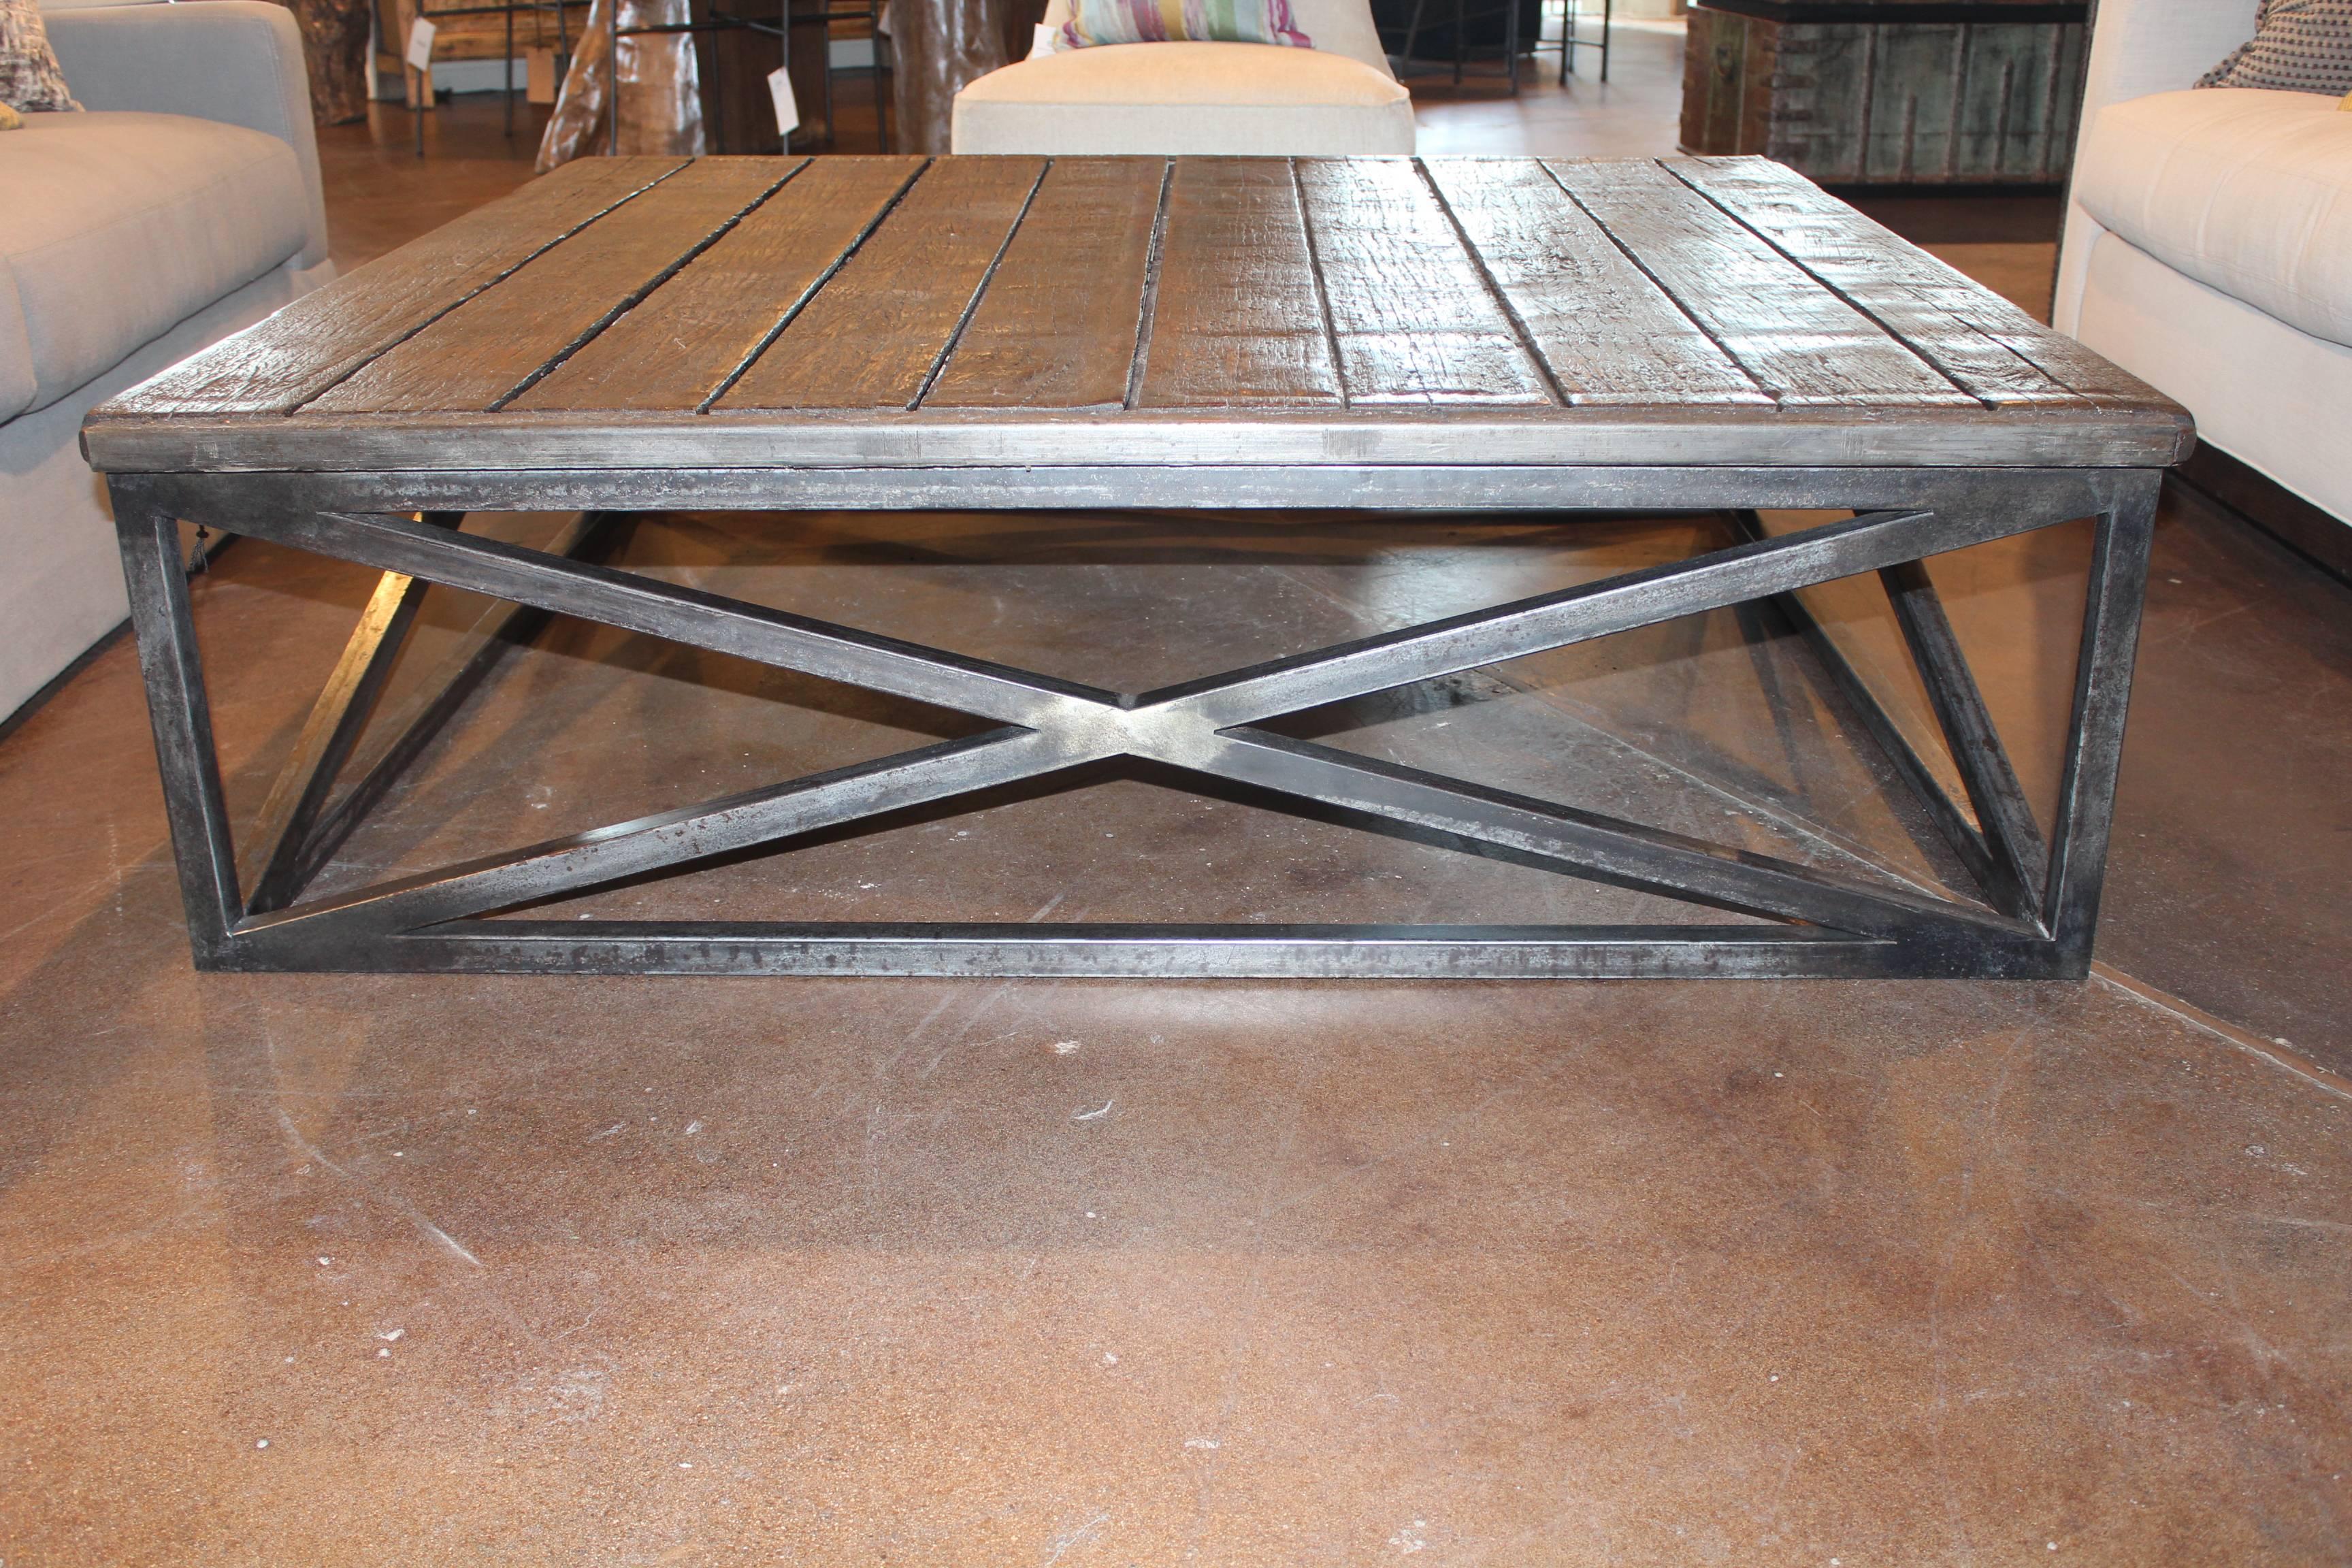 Vintage brick baking pallet coffee table with metal "X" base /customizable.